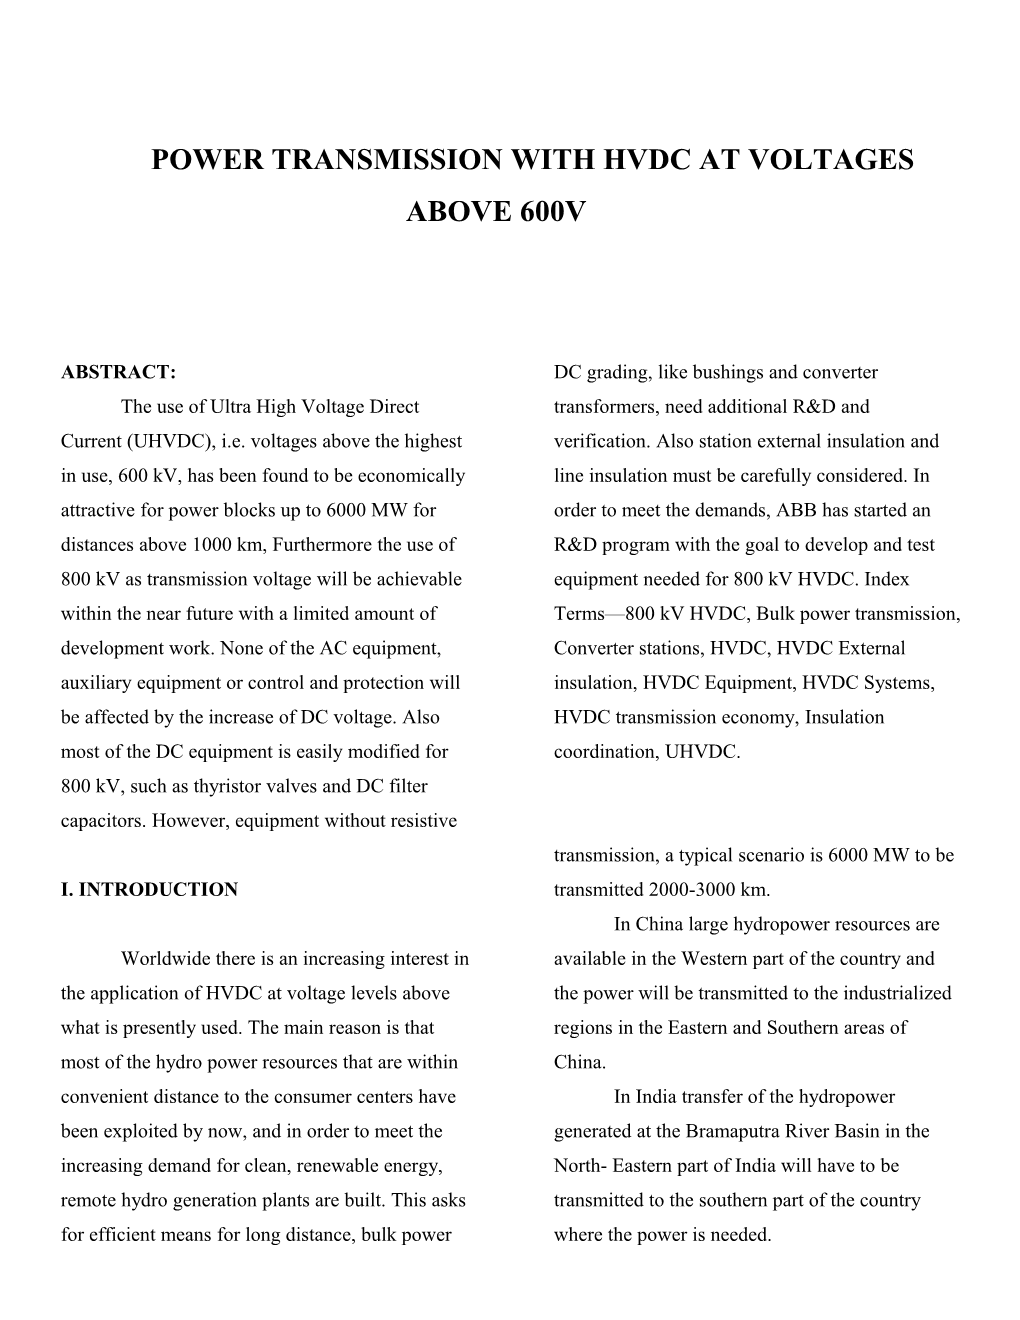 Power Transmission with HVDC at Voltages